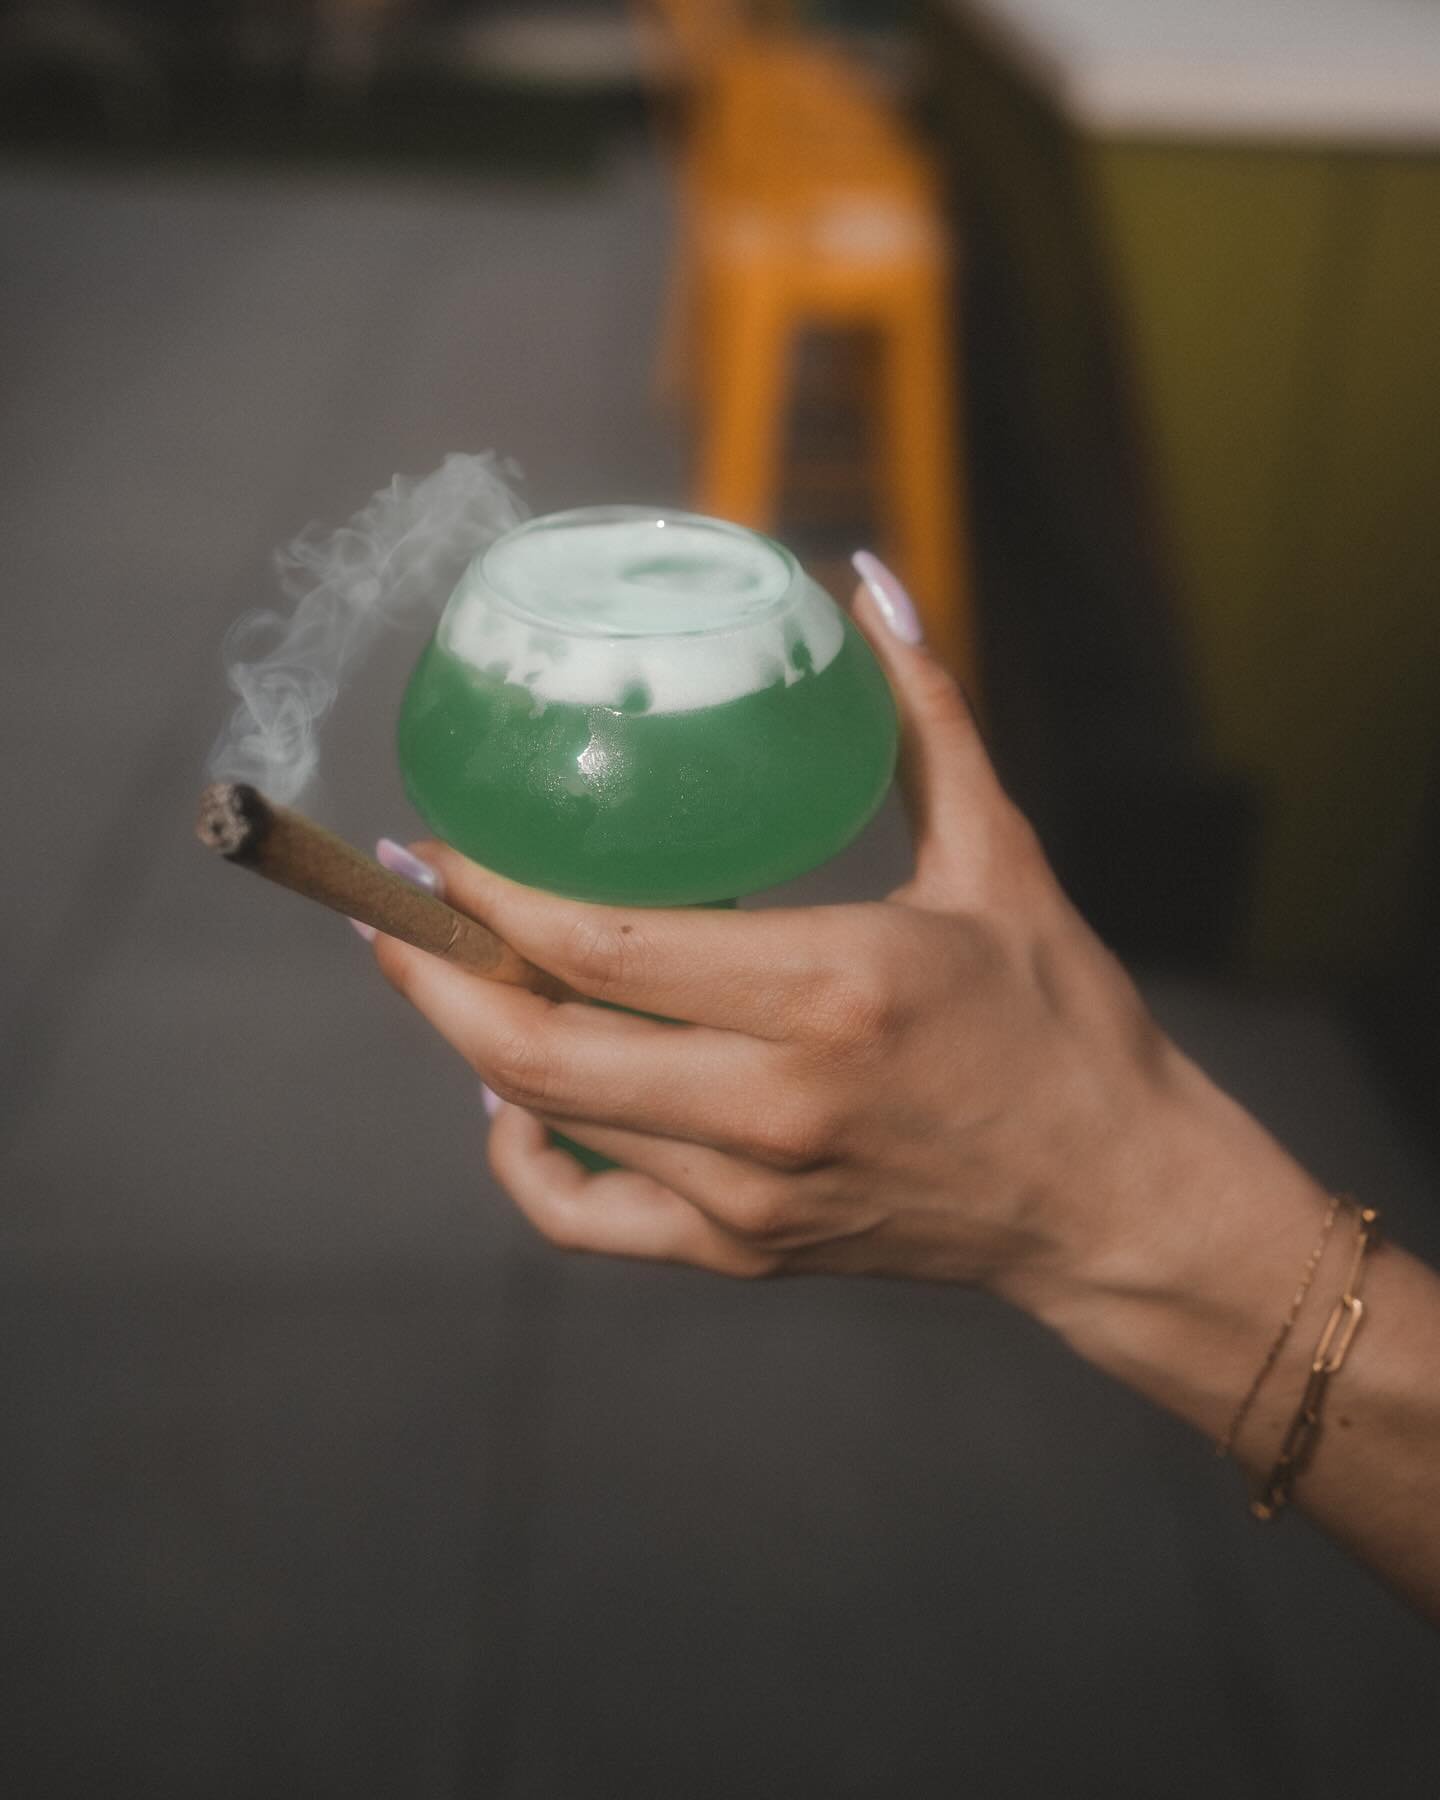 forecast for this saturday is lookin&rsquo; hazy💨

so we rolled up some specials for the occasion🥂 doors open at 5p for 4/20 specials:

-beat the clock-
$3 Liquid Mary Jane&rsquo;s
$4 Ondas
$6 Coastalo
*prices raise a dollar on the hour*

music by 